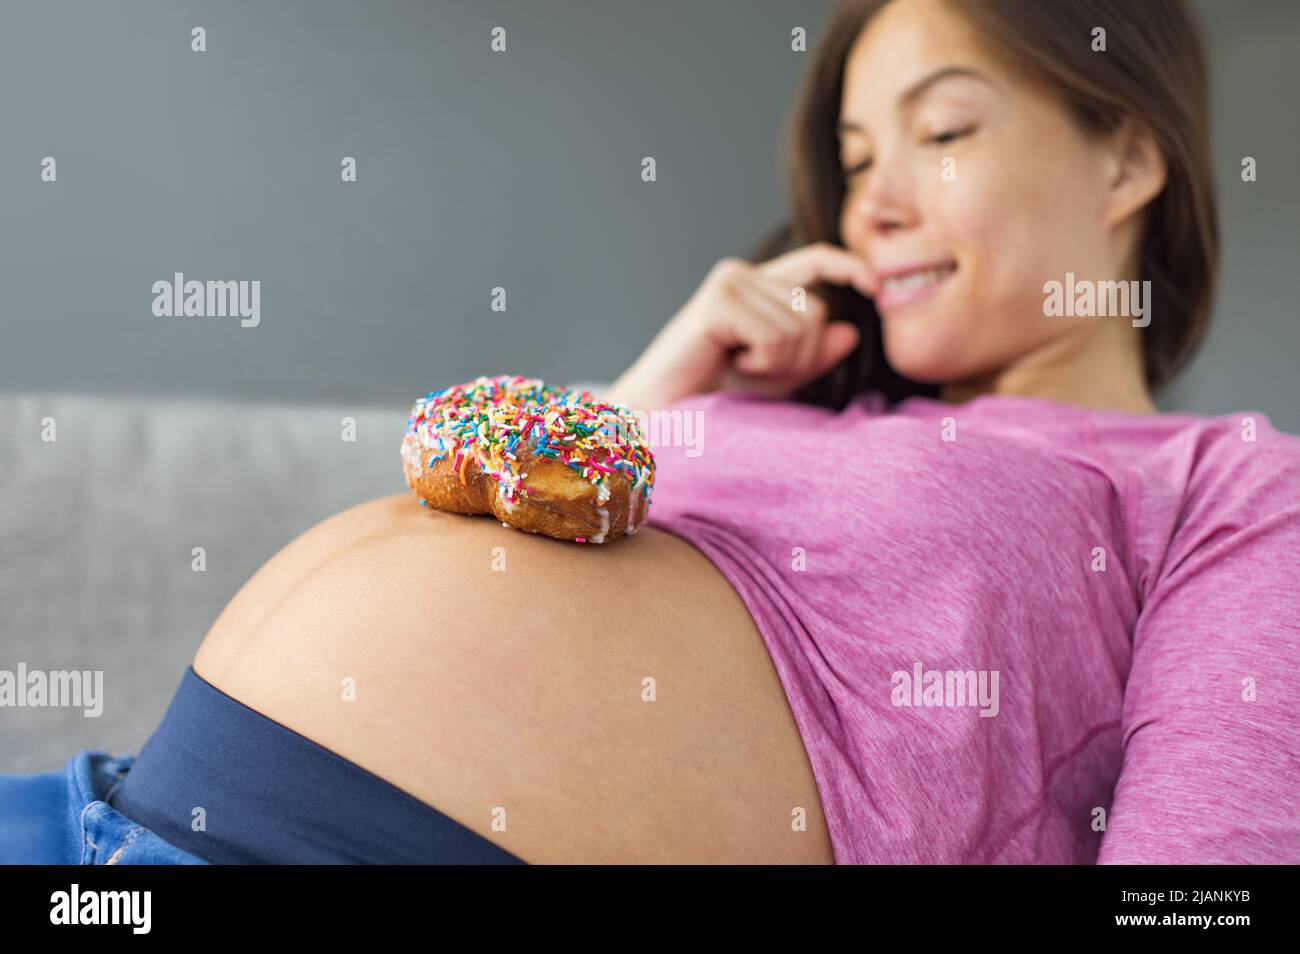 Unhealthy food during pregnancy. Sugar temptation craving Asian pregnant woman trying to resist eating a sweet donut on her baby belly. Funny eating Stock Photo